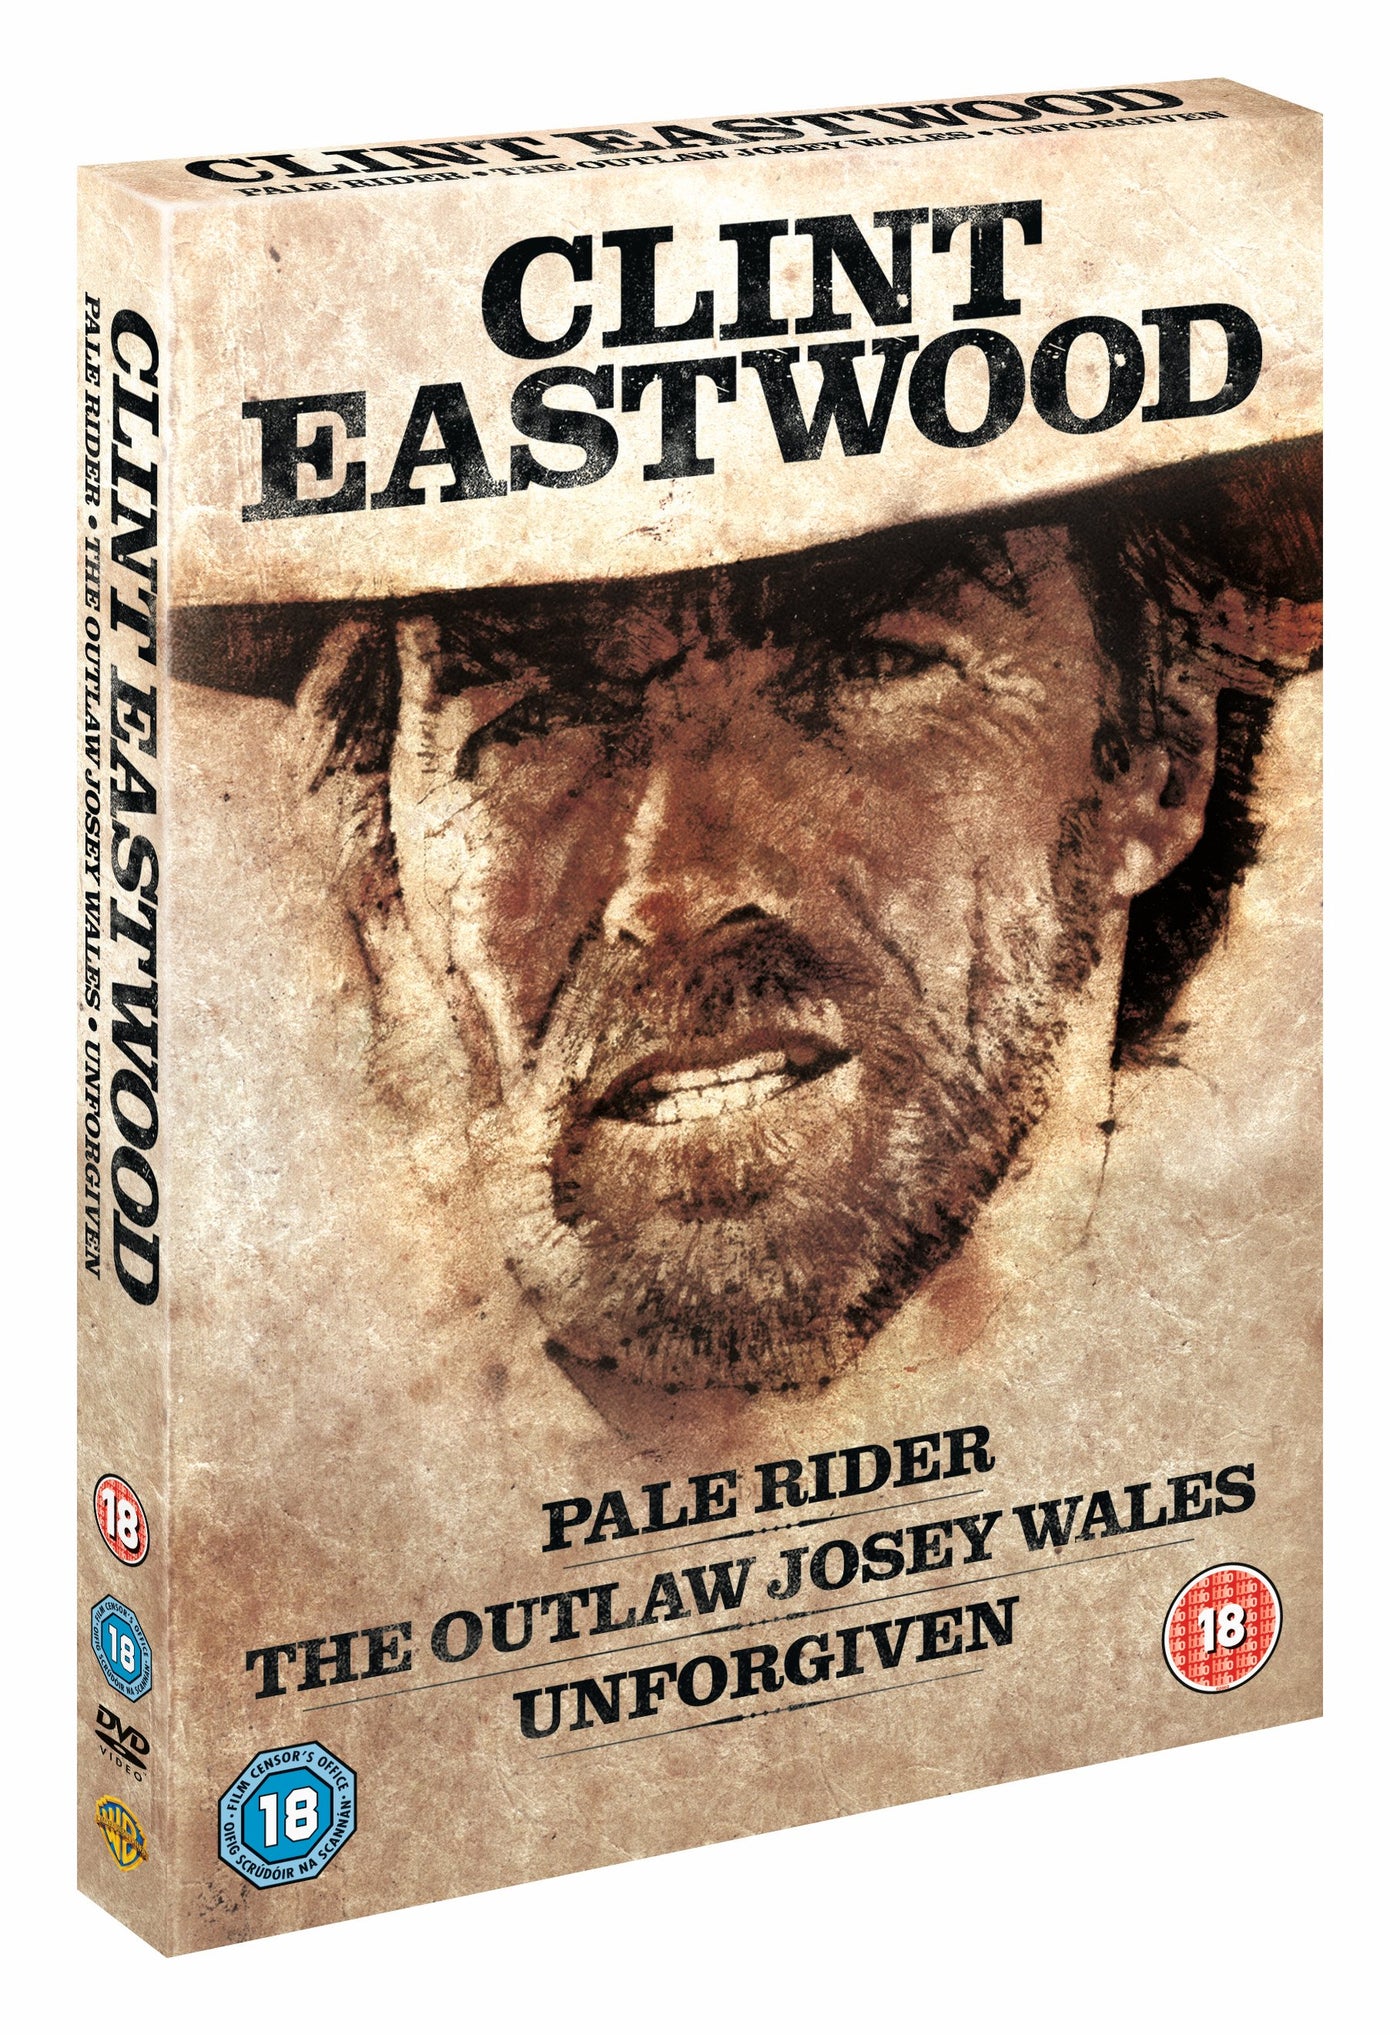 Pale Rider/The Outlaw Josey Wales/Unforgiven [2010] (DVD)